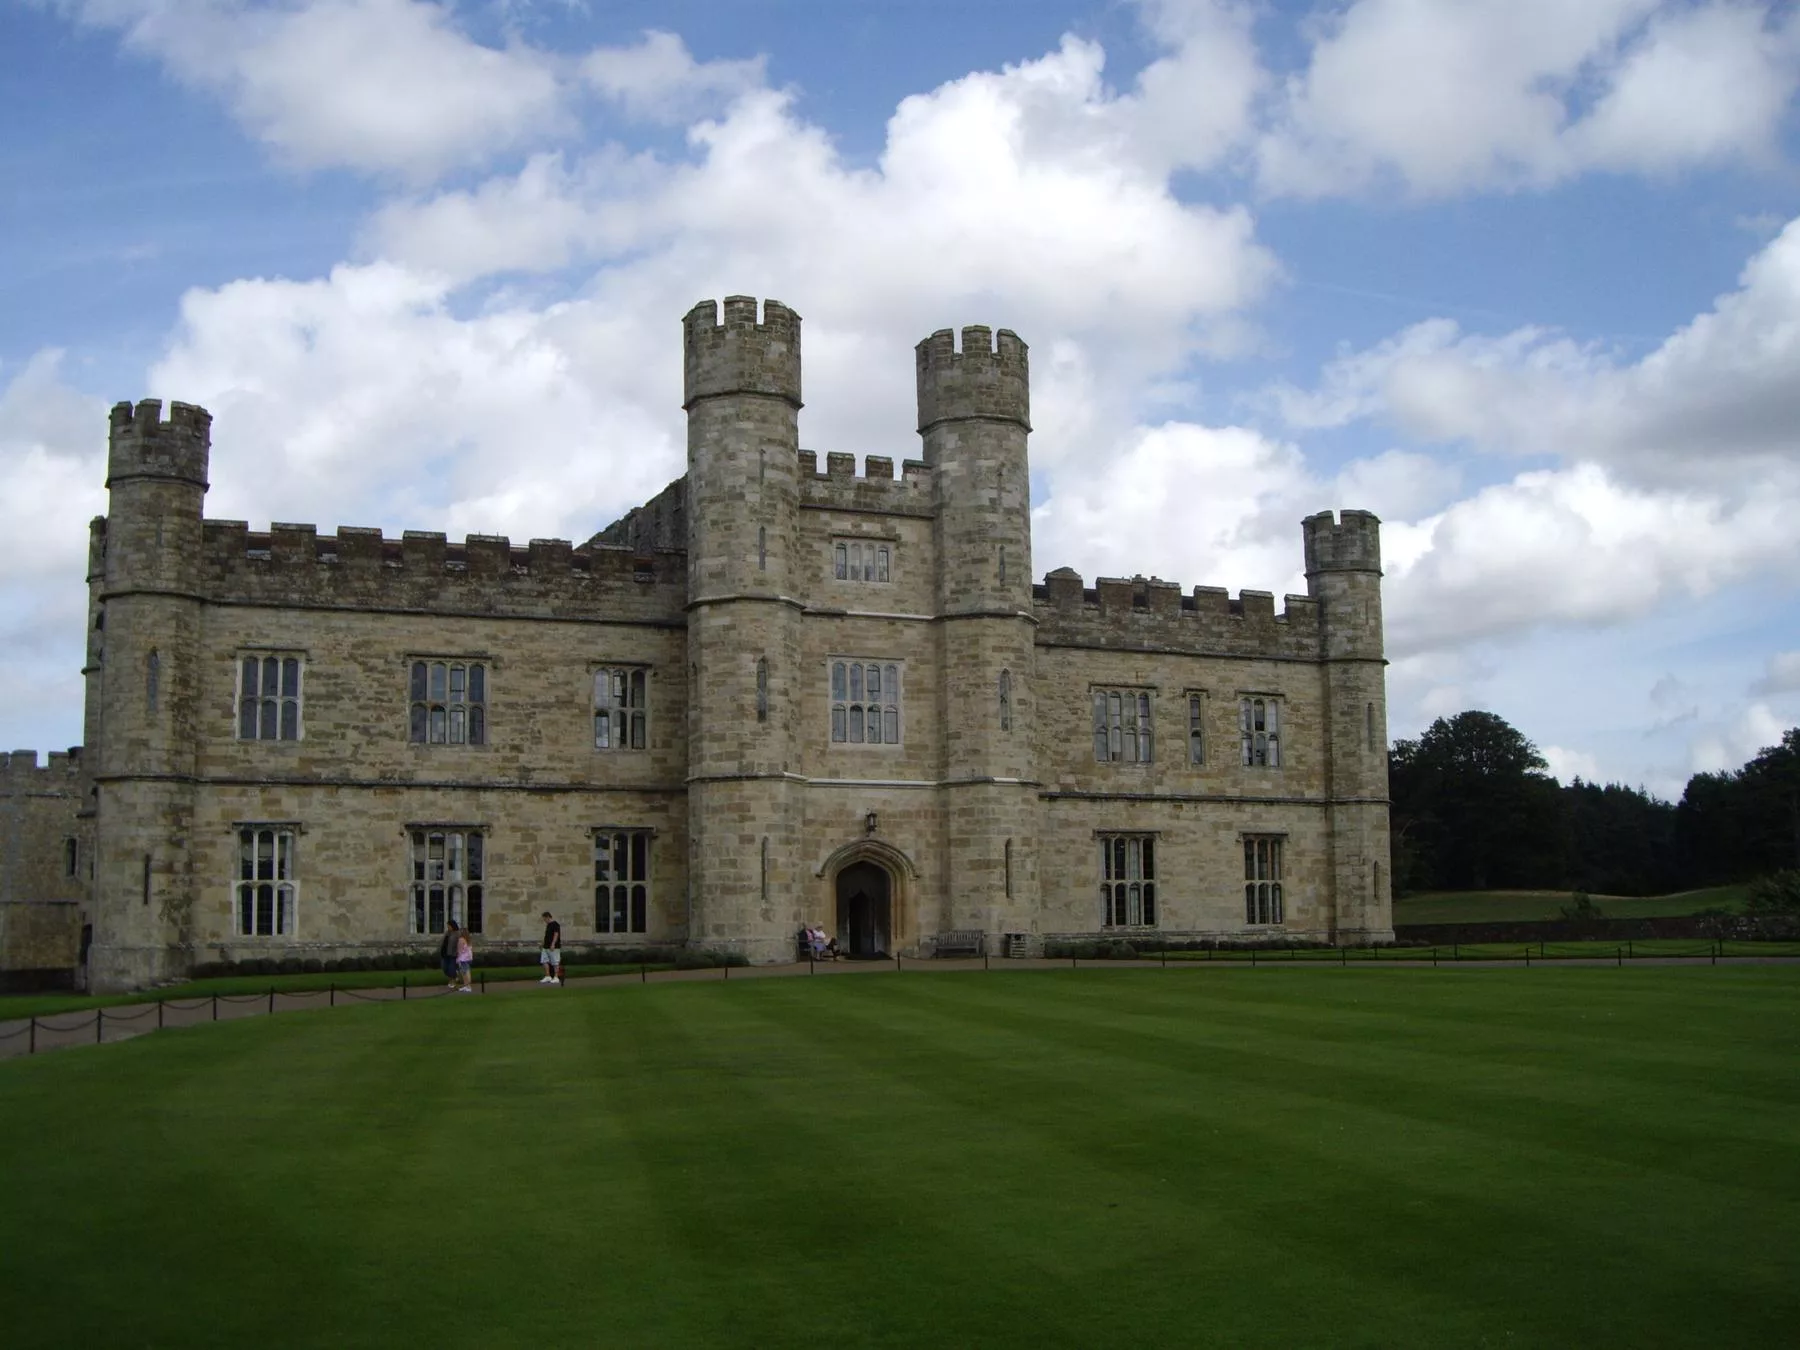 LEEDS CASTLE is set on two islands on the River Len in the heart of Kent in England, has been fortif